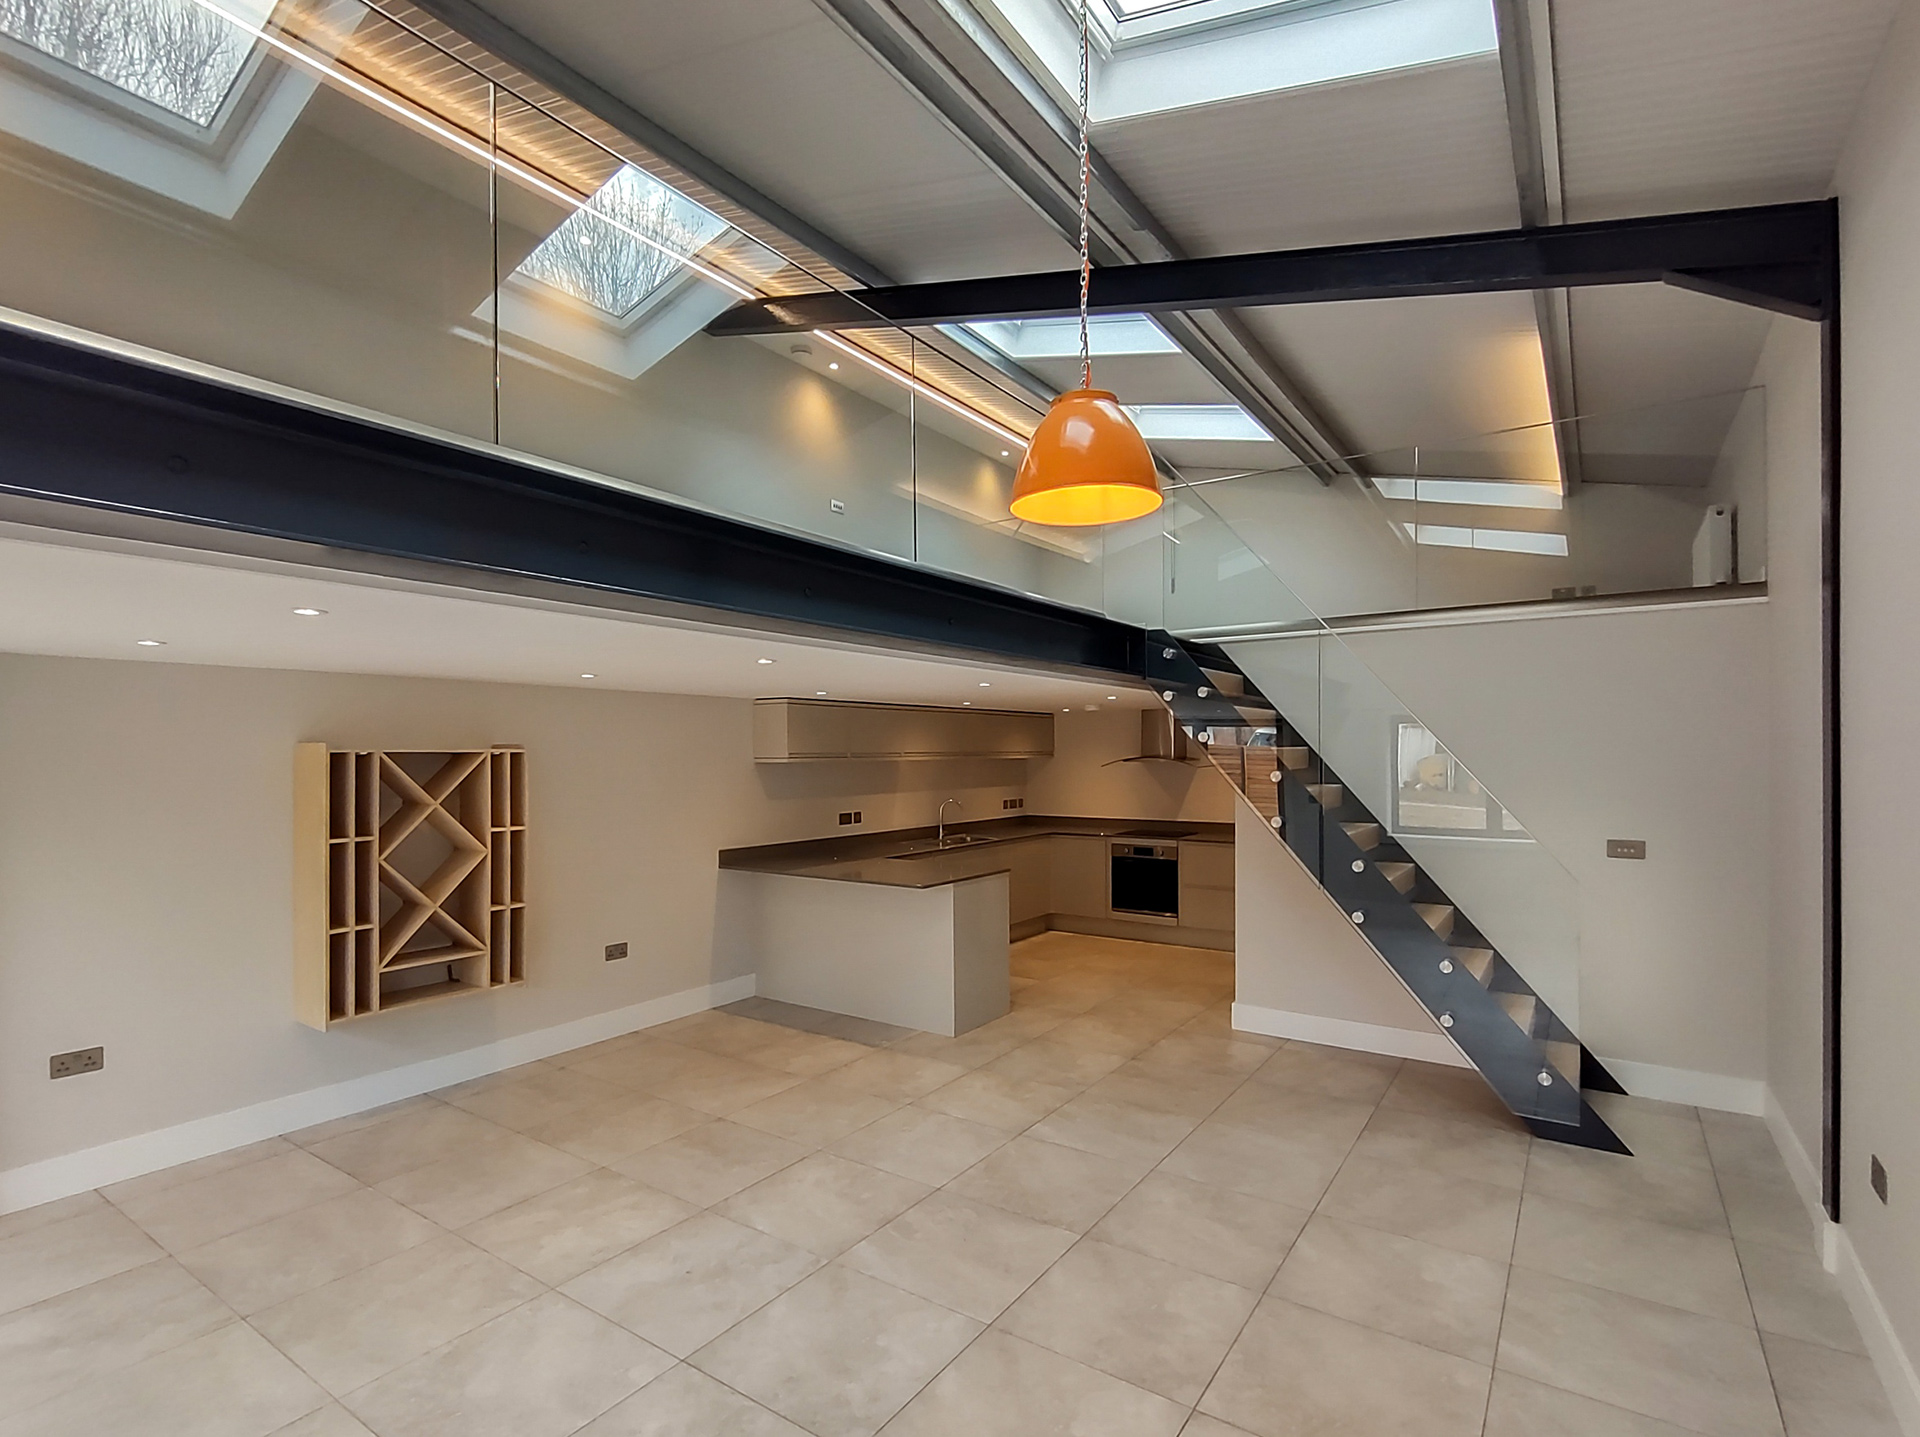 internal living space in barn conversion with large open mezzanine level